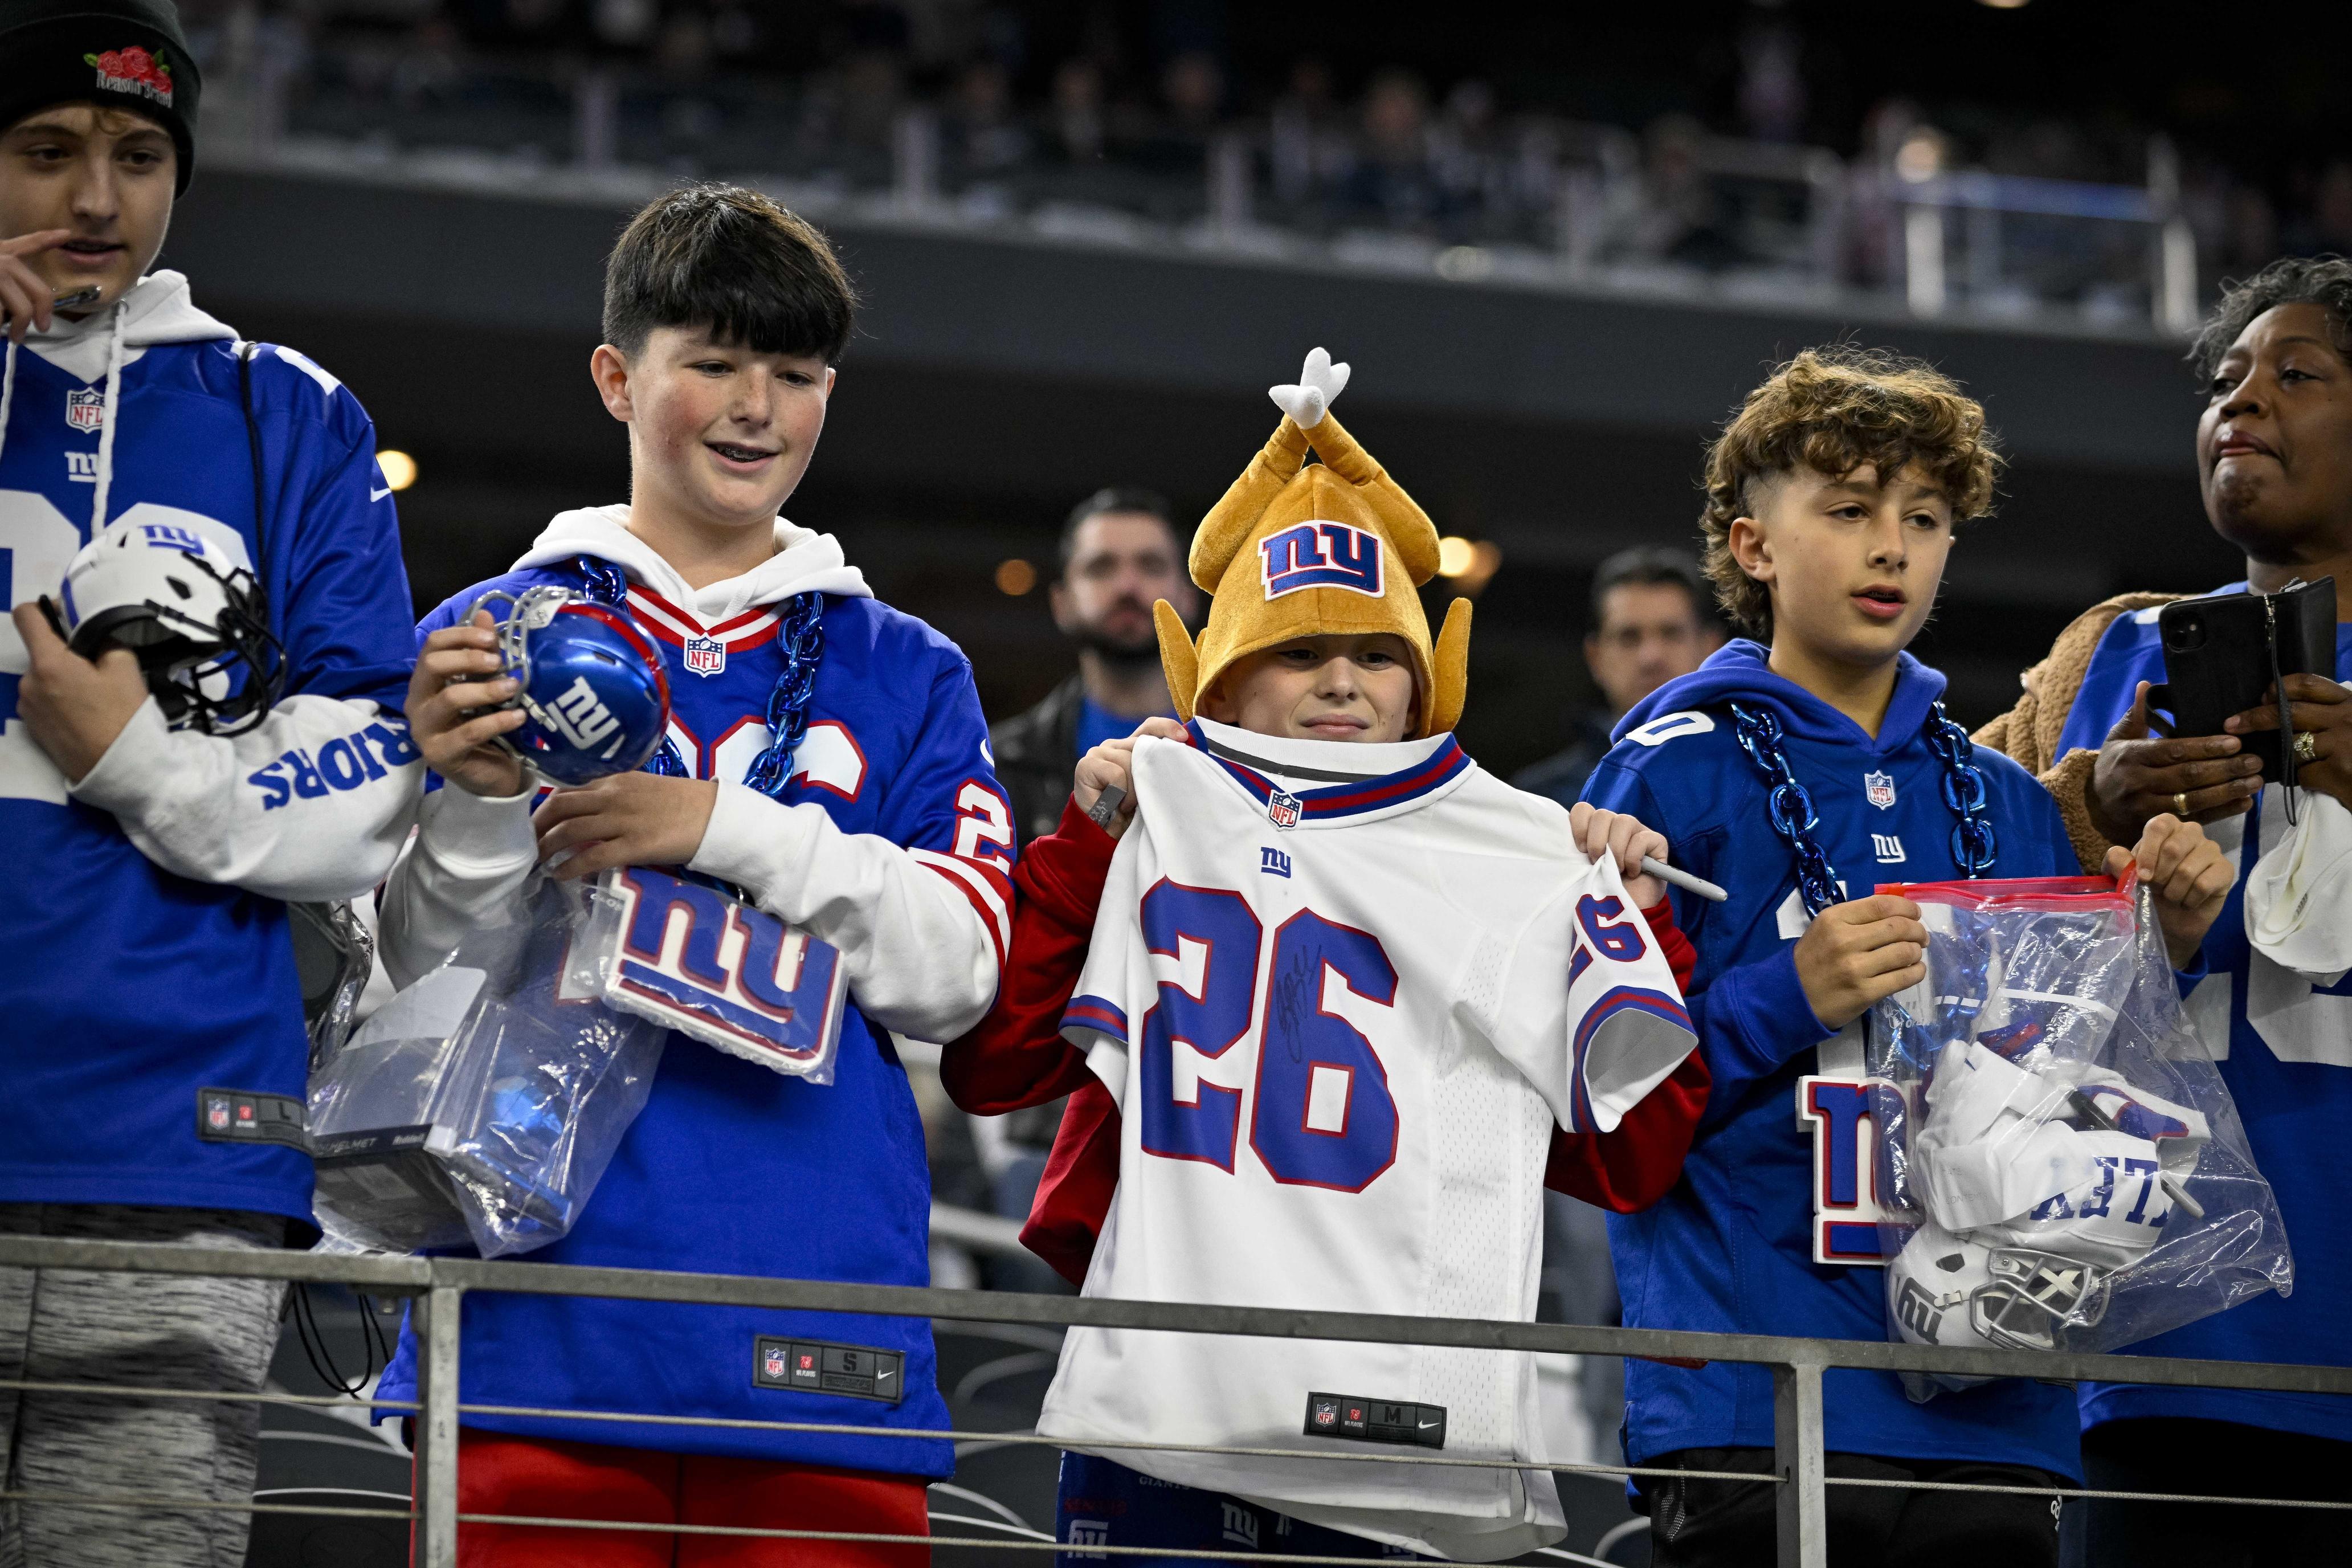 how to, new york giants vs. philadelphia eagles: how to watch live stream, tv channel, nfl start time